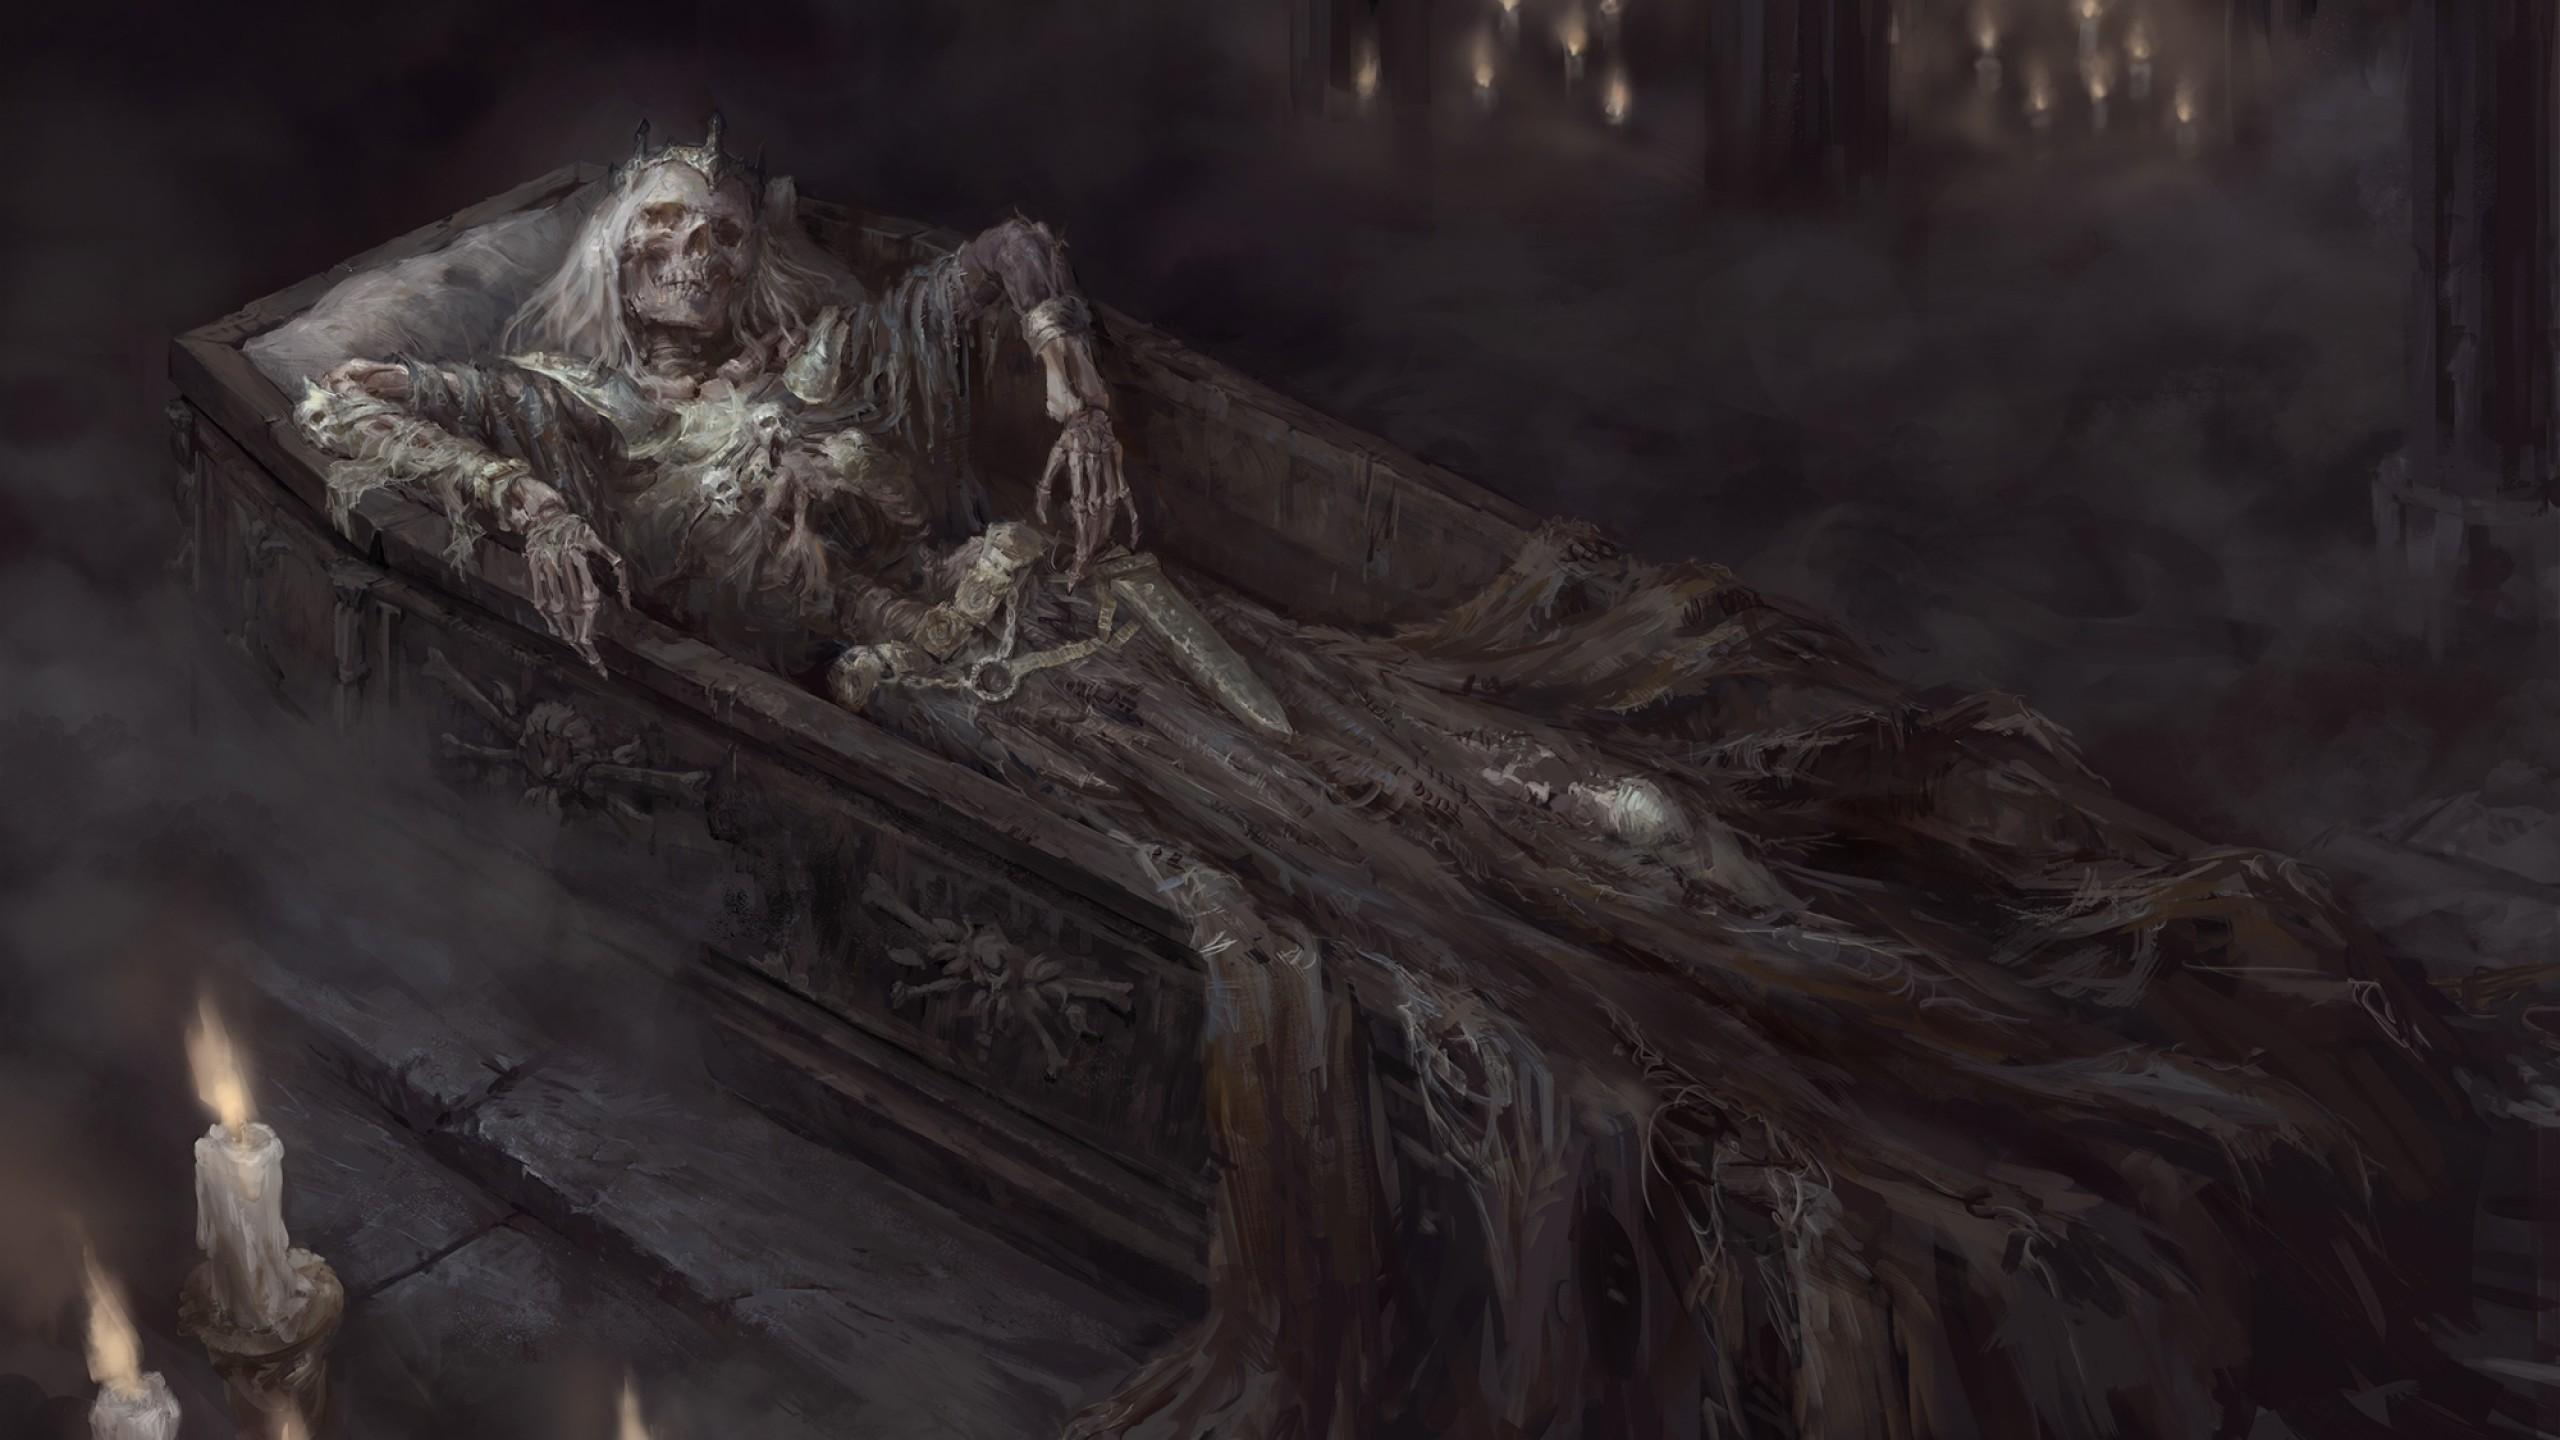 Download 2560x1440 Skeleton, Coffin, Horror, Scary, Crown